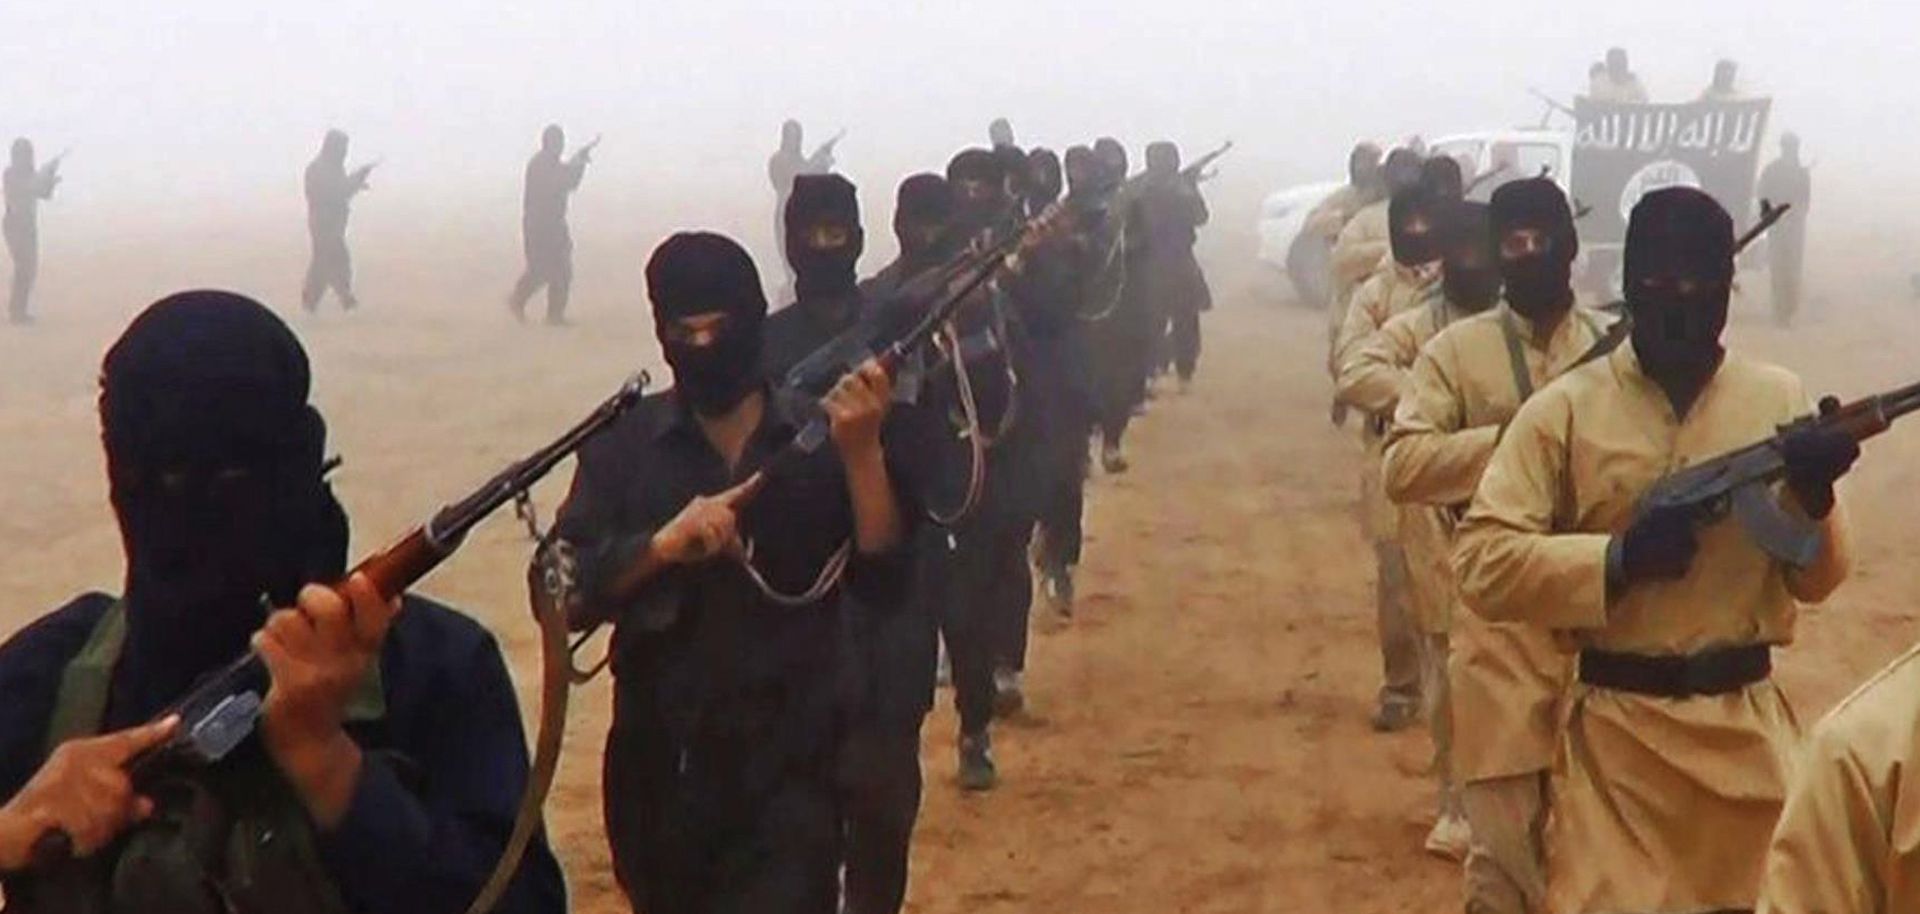 Islamic State militants march with weapons in a propaganda video. (Islamic State)